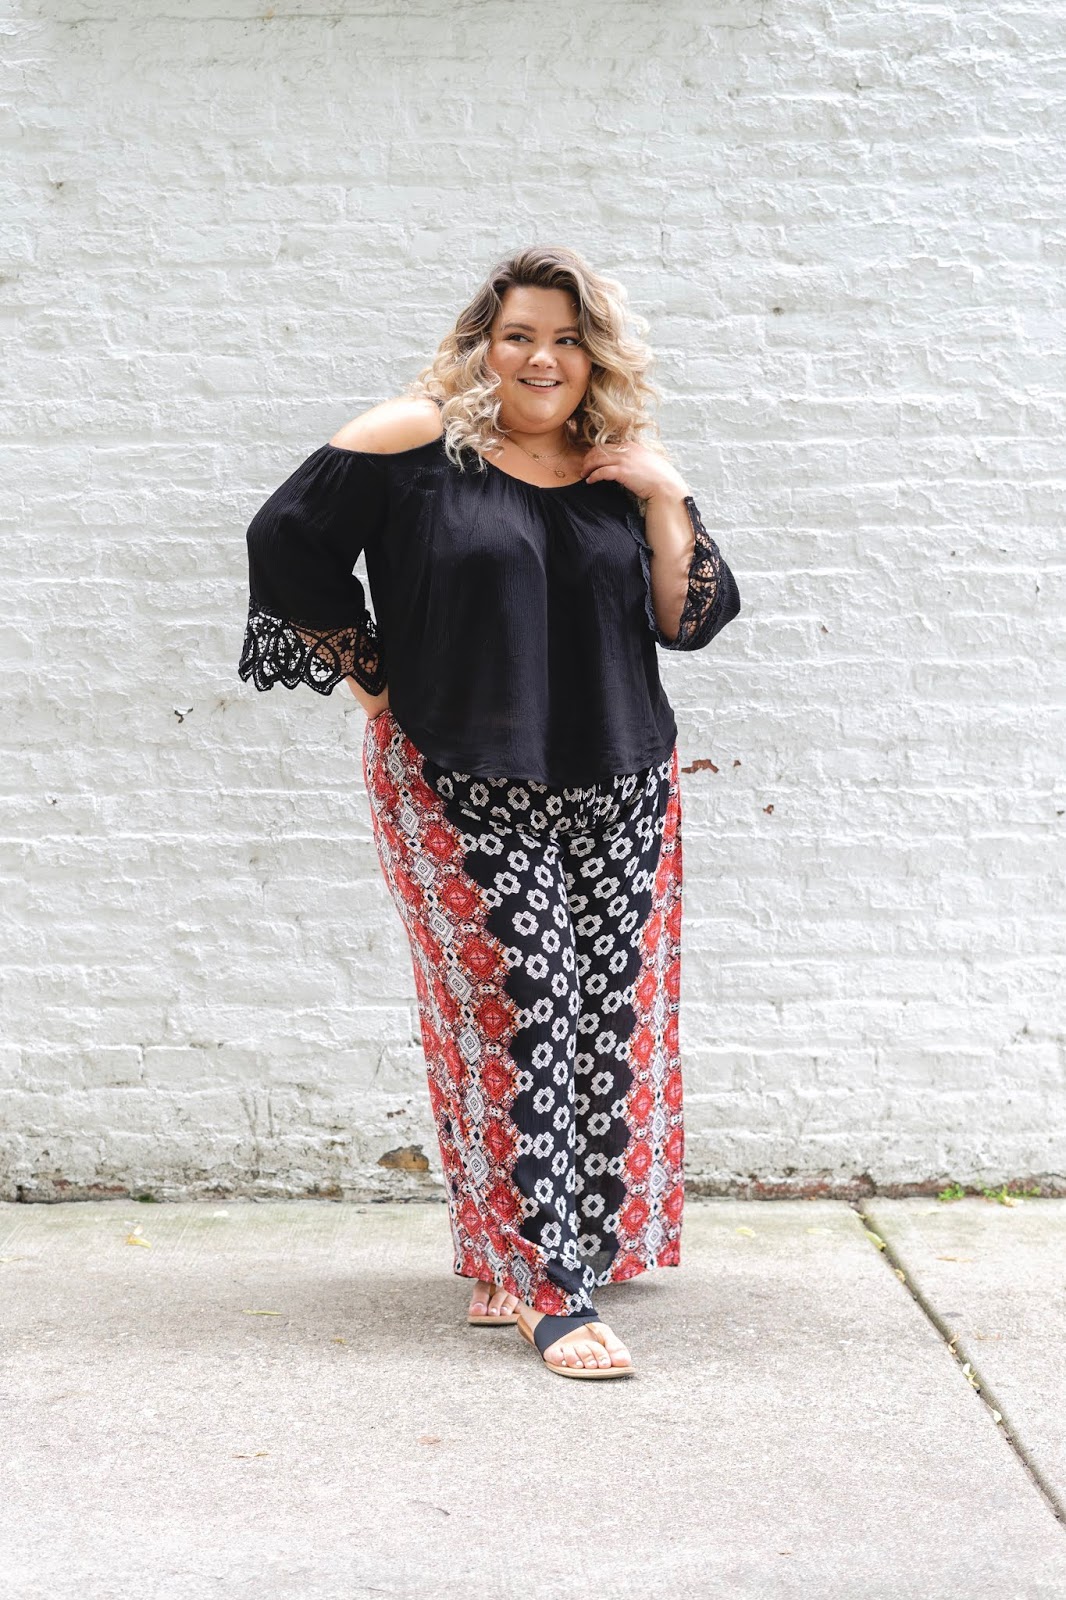 natalie Craig, natalie in the city, plus size fashion, Chicago fashion, plus size fashion blogger, eff your beauty standards, fatshion, skorch magazine, Chicago model, plus size model, plus size petite, affordable plus size clothing, embrace your curves, plus model magazine, petite plus size, bohemian pants, plus size bohemian, gordmans, plus size gordmans